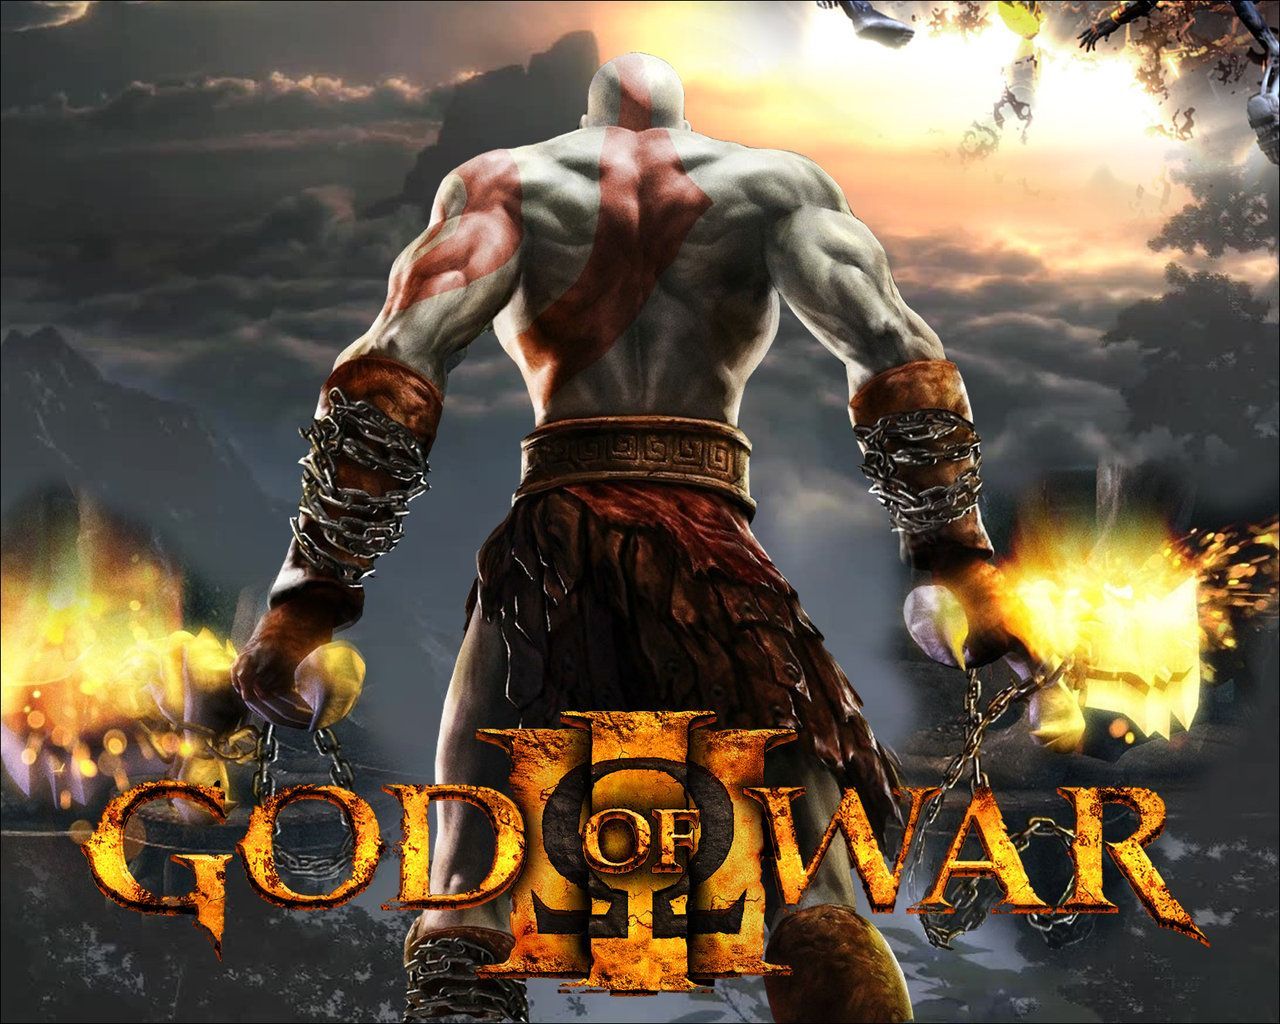 How to download god of war 3 pc